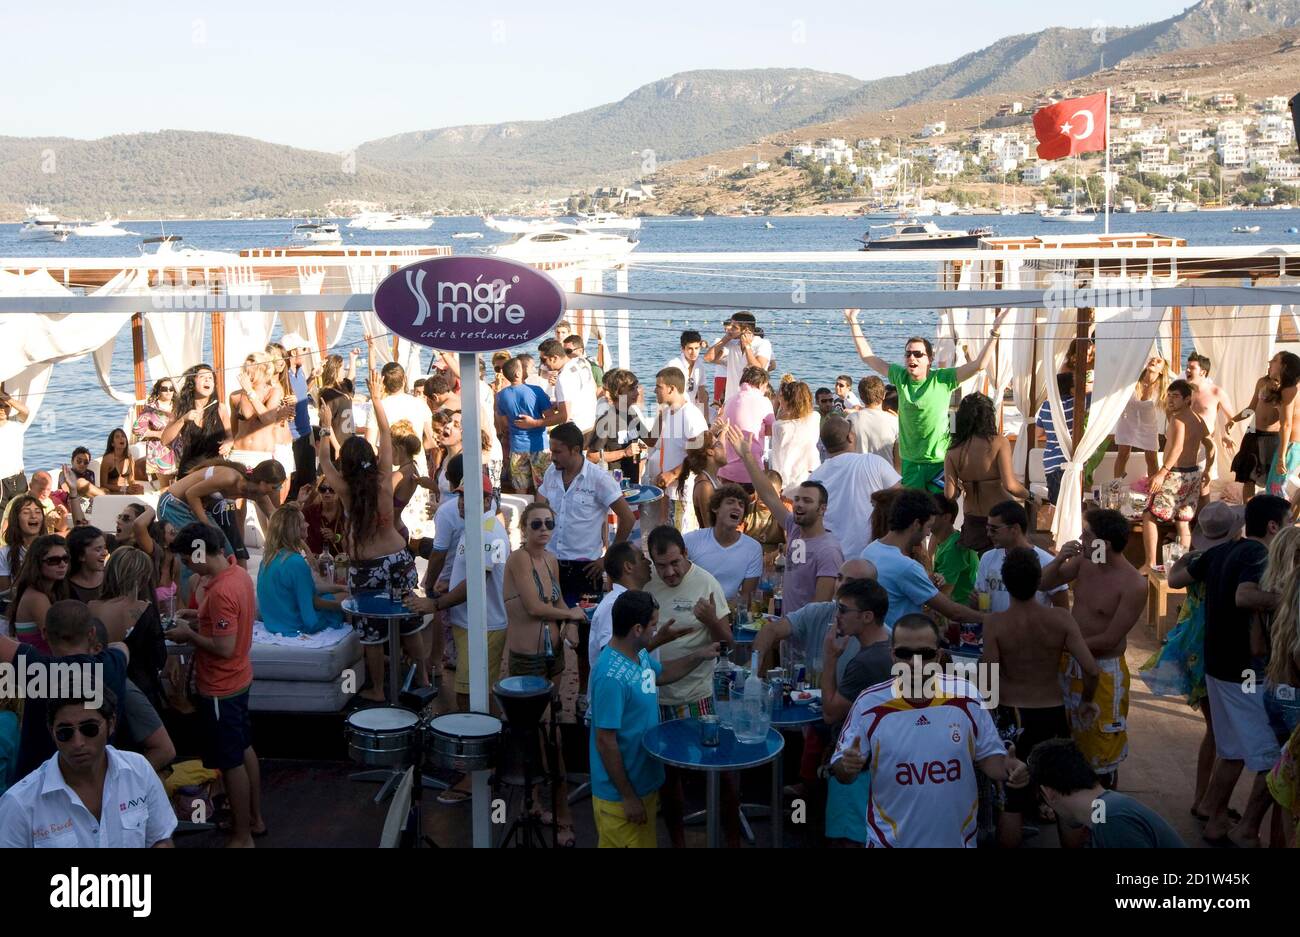 Young people dance and sing during a party in a beach club in Golturkbuku,  known for its luxury hotels, near the resort town of Bodrum on the  southwest Aegean coast of Turkey